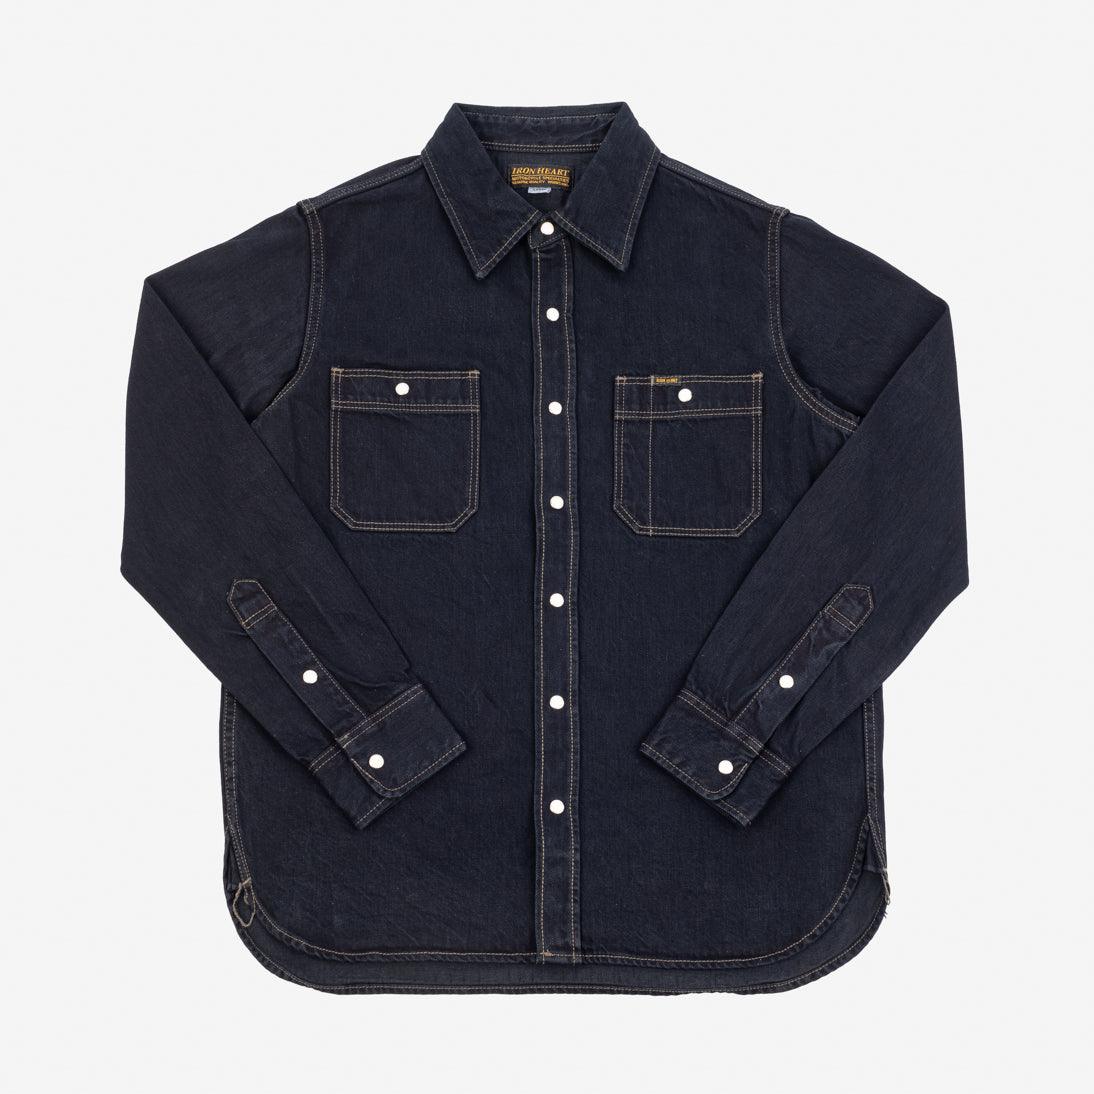 Iron Heart 12oz Selvedge Denim Work Shirt With Snaps IHSH-326-OD - Indigo Overdyed Black - Guilty Party